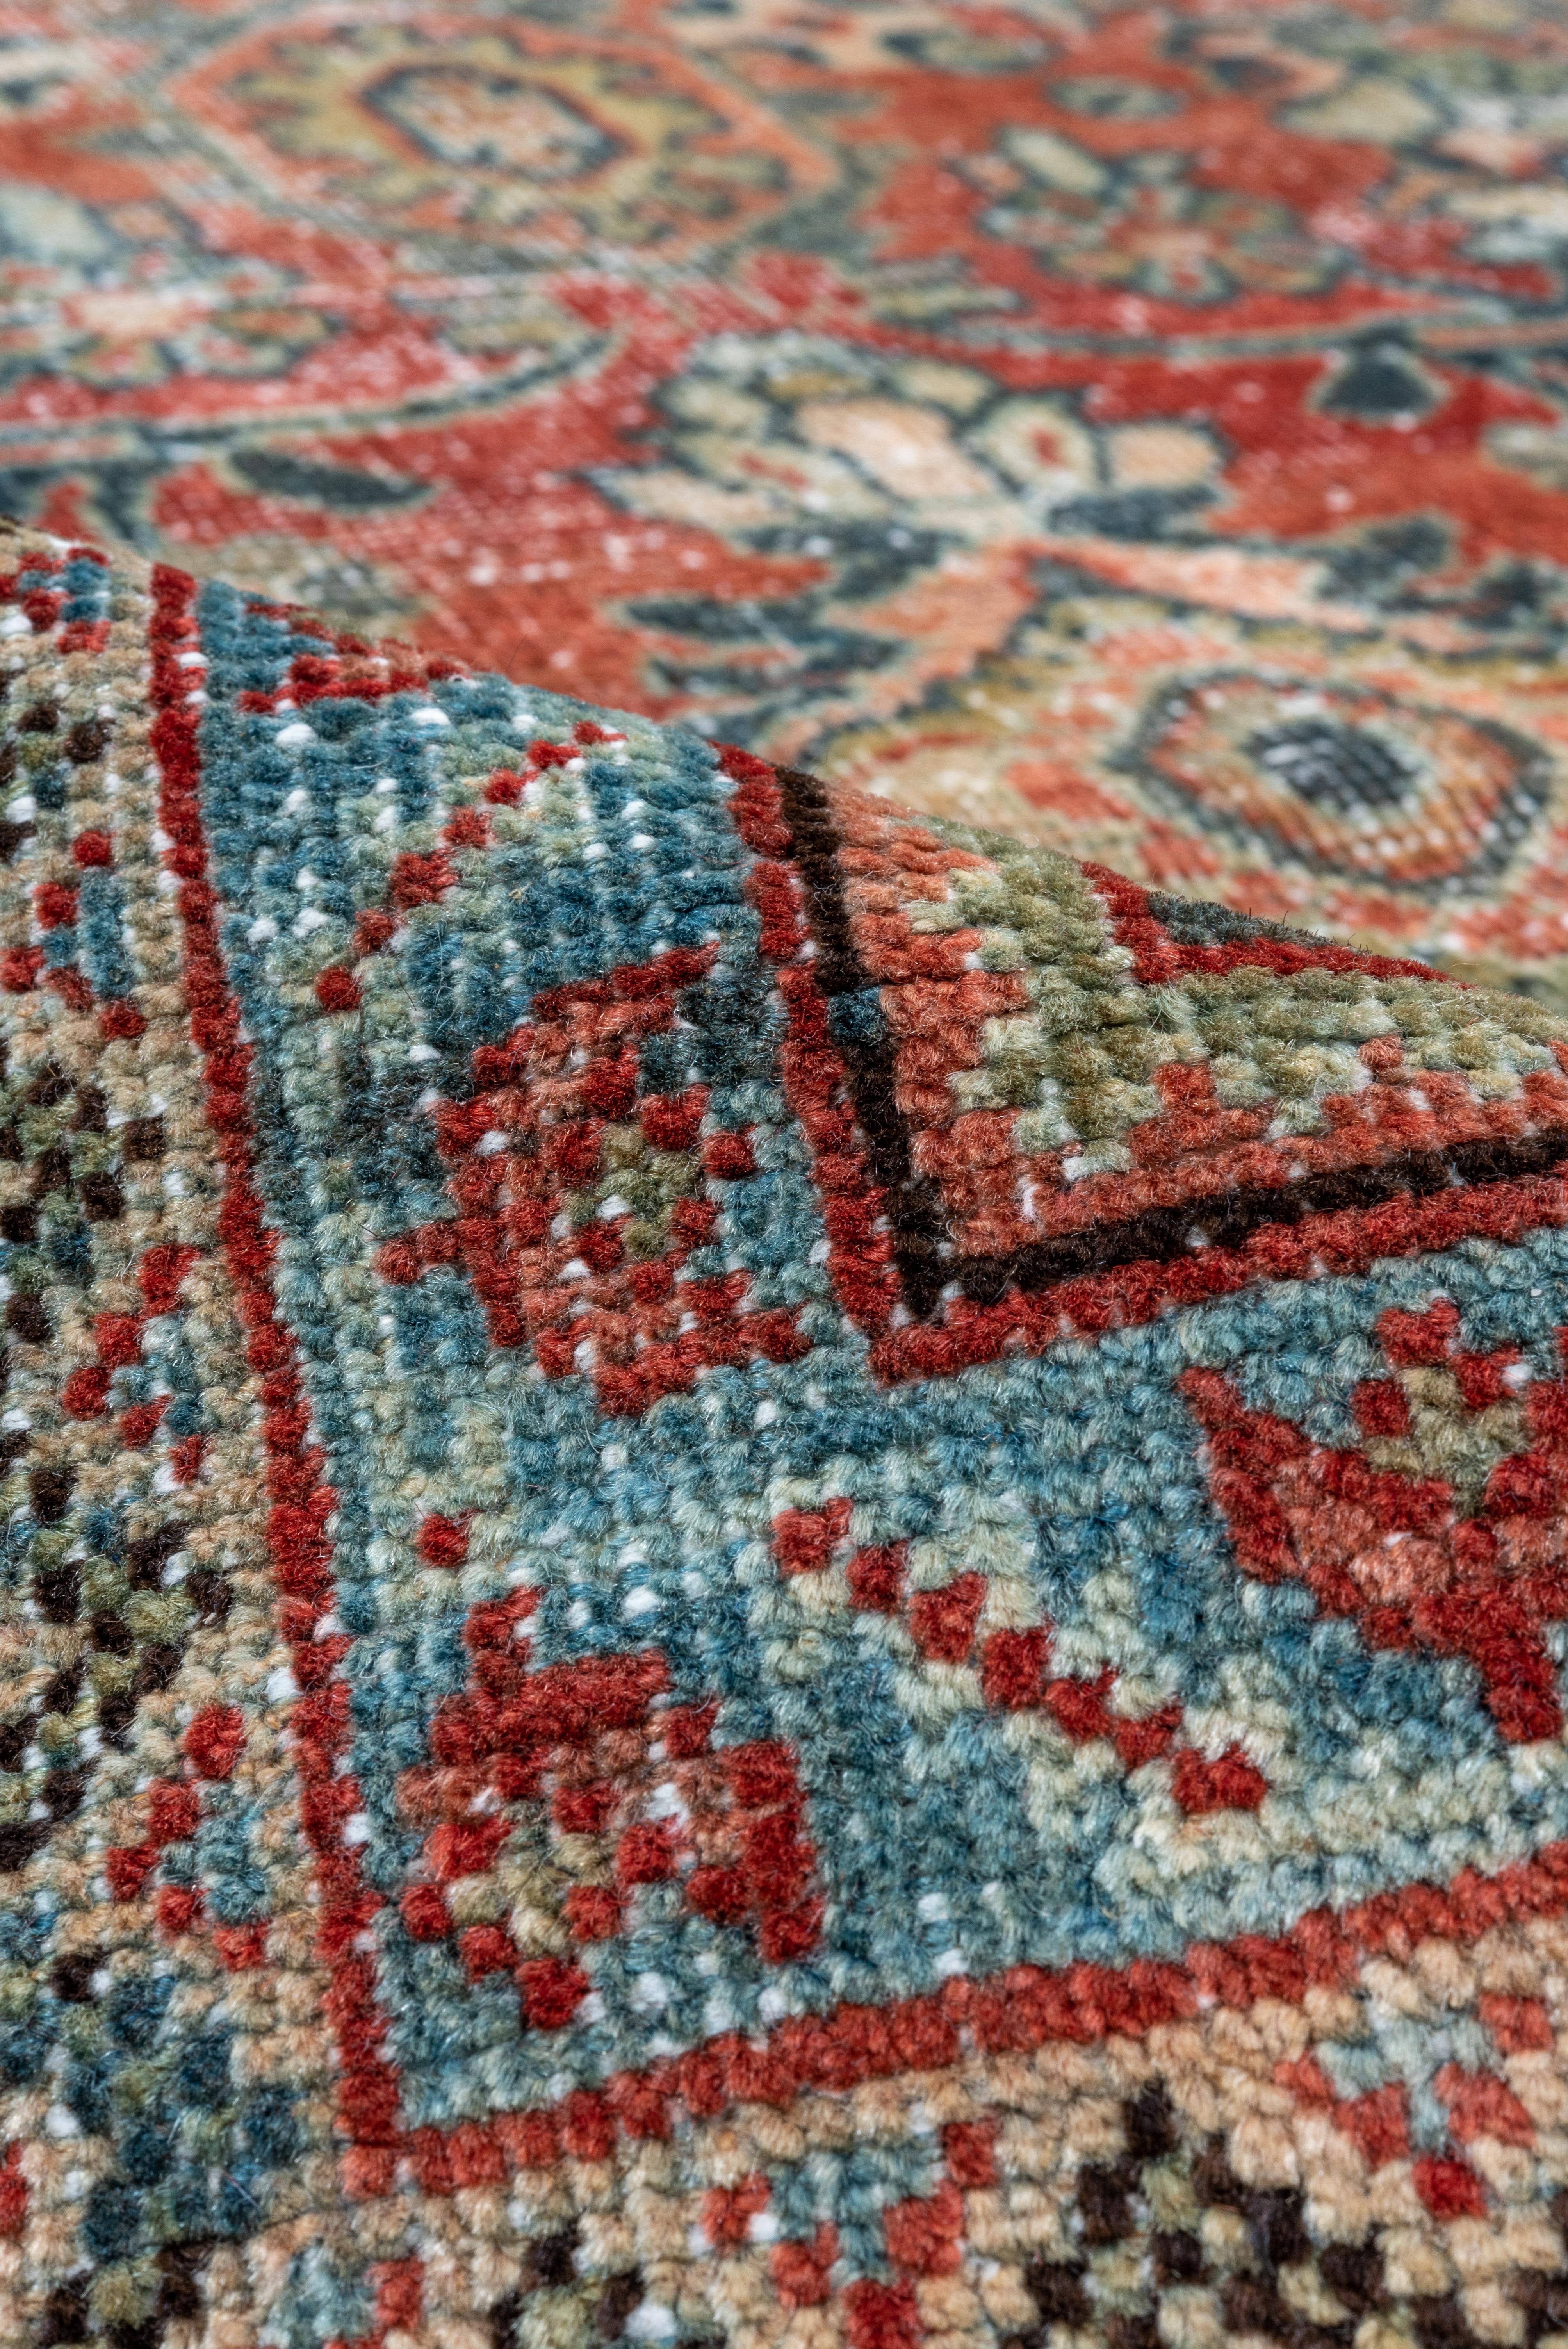 The rust-red field displays a characteristically unusual all-over Mahal pattern of oblique long leaves, tabbed octagons, palmettes, cruciforms with petal palmette fiials and other unusual motives. Accents in shades of blue teal and green. Sapphire